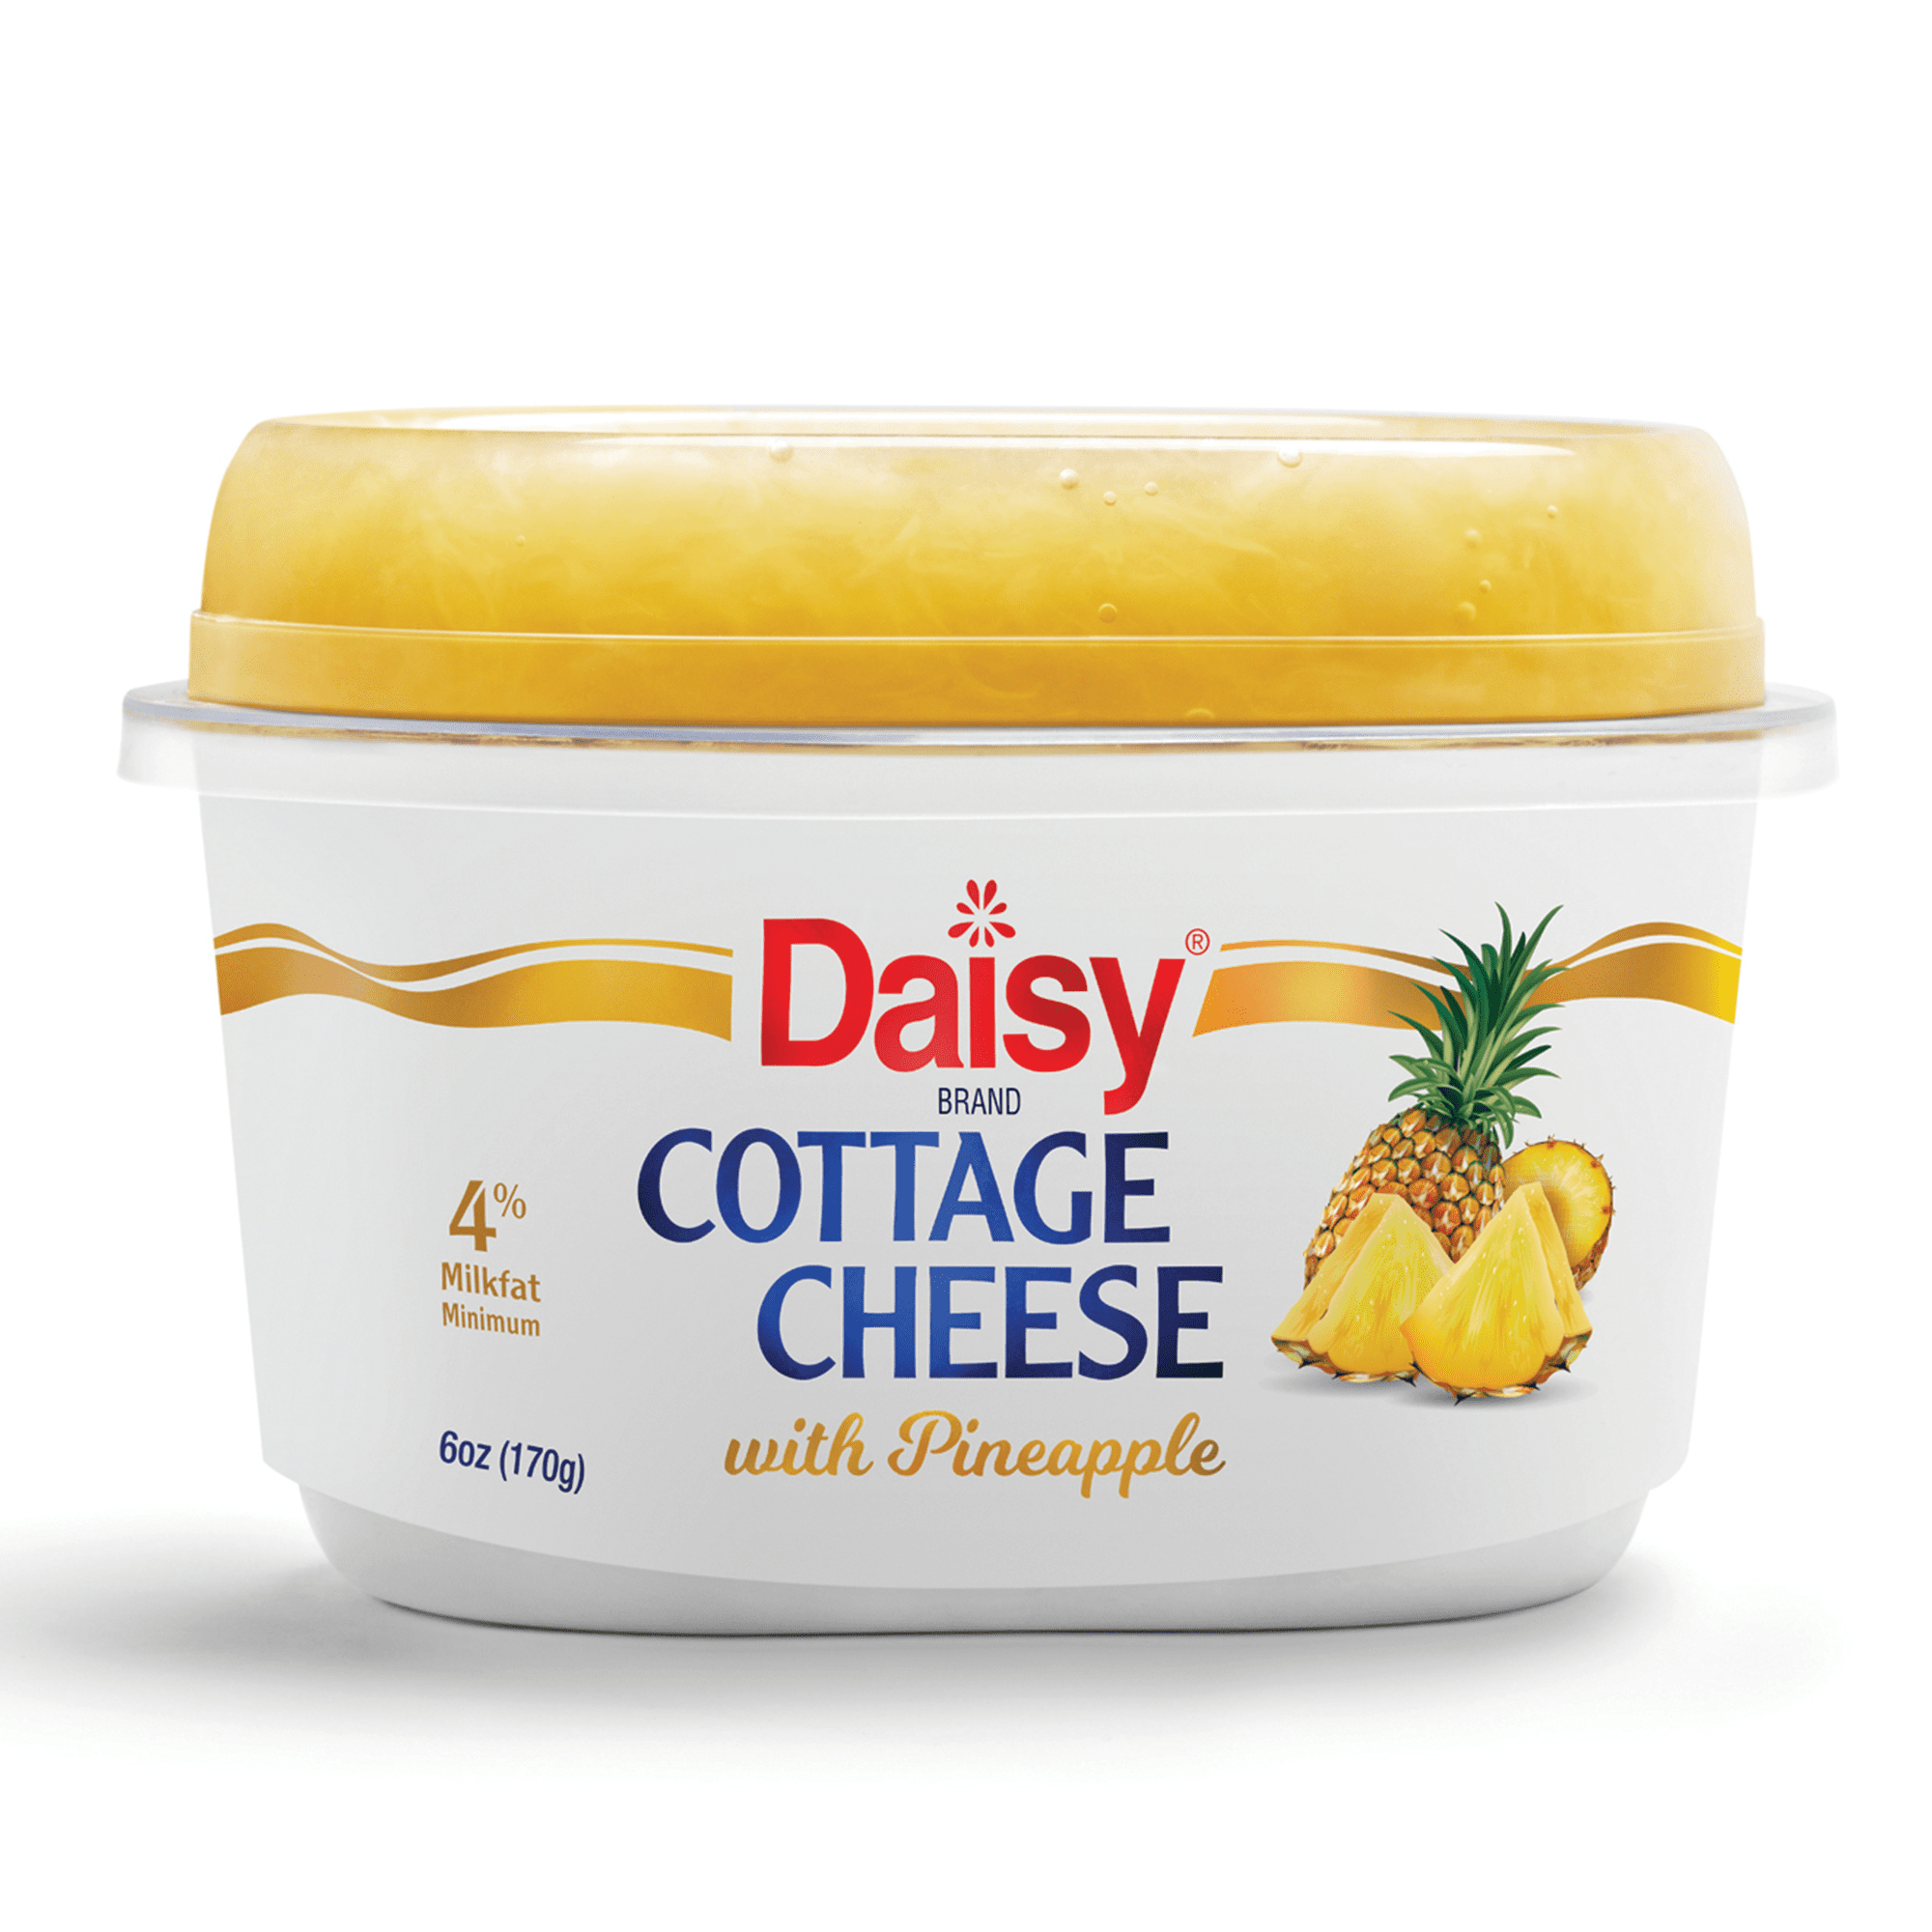 Daisy Cottage Cheese with Pineapple, Single Serve, 6.0 oz